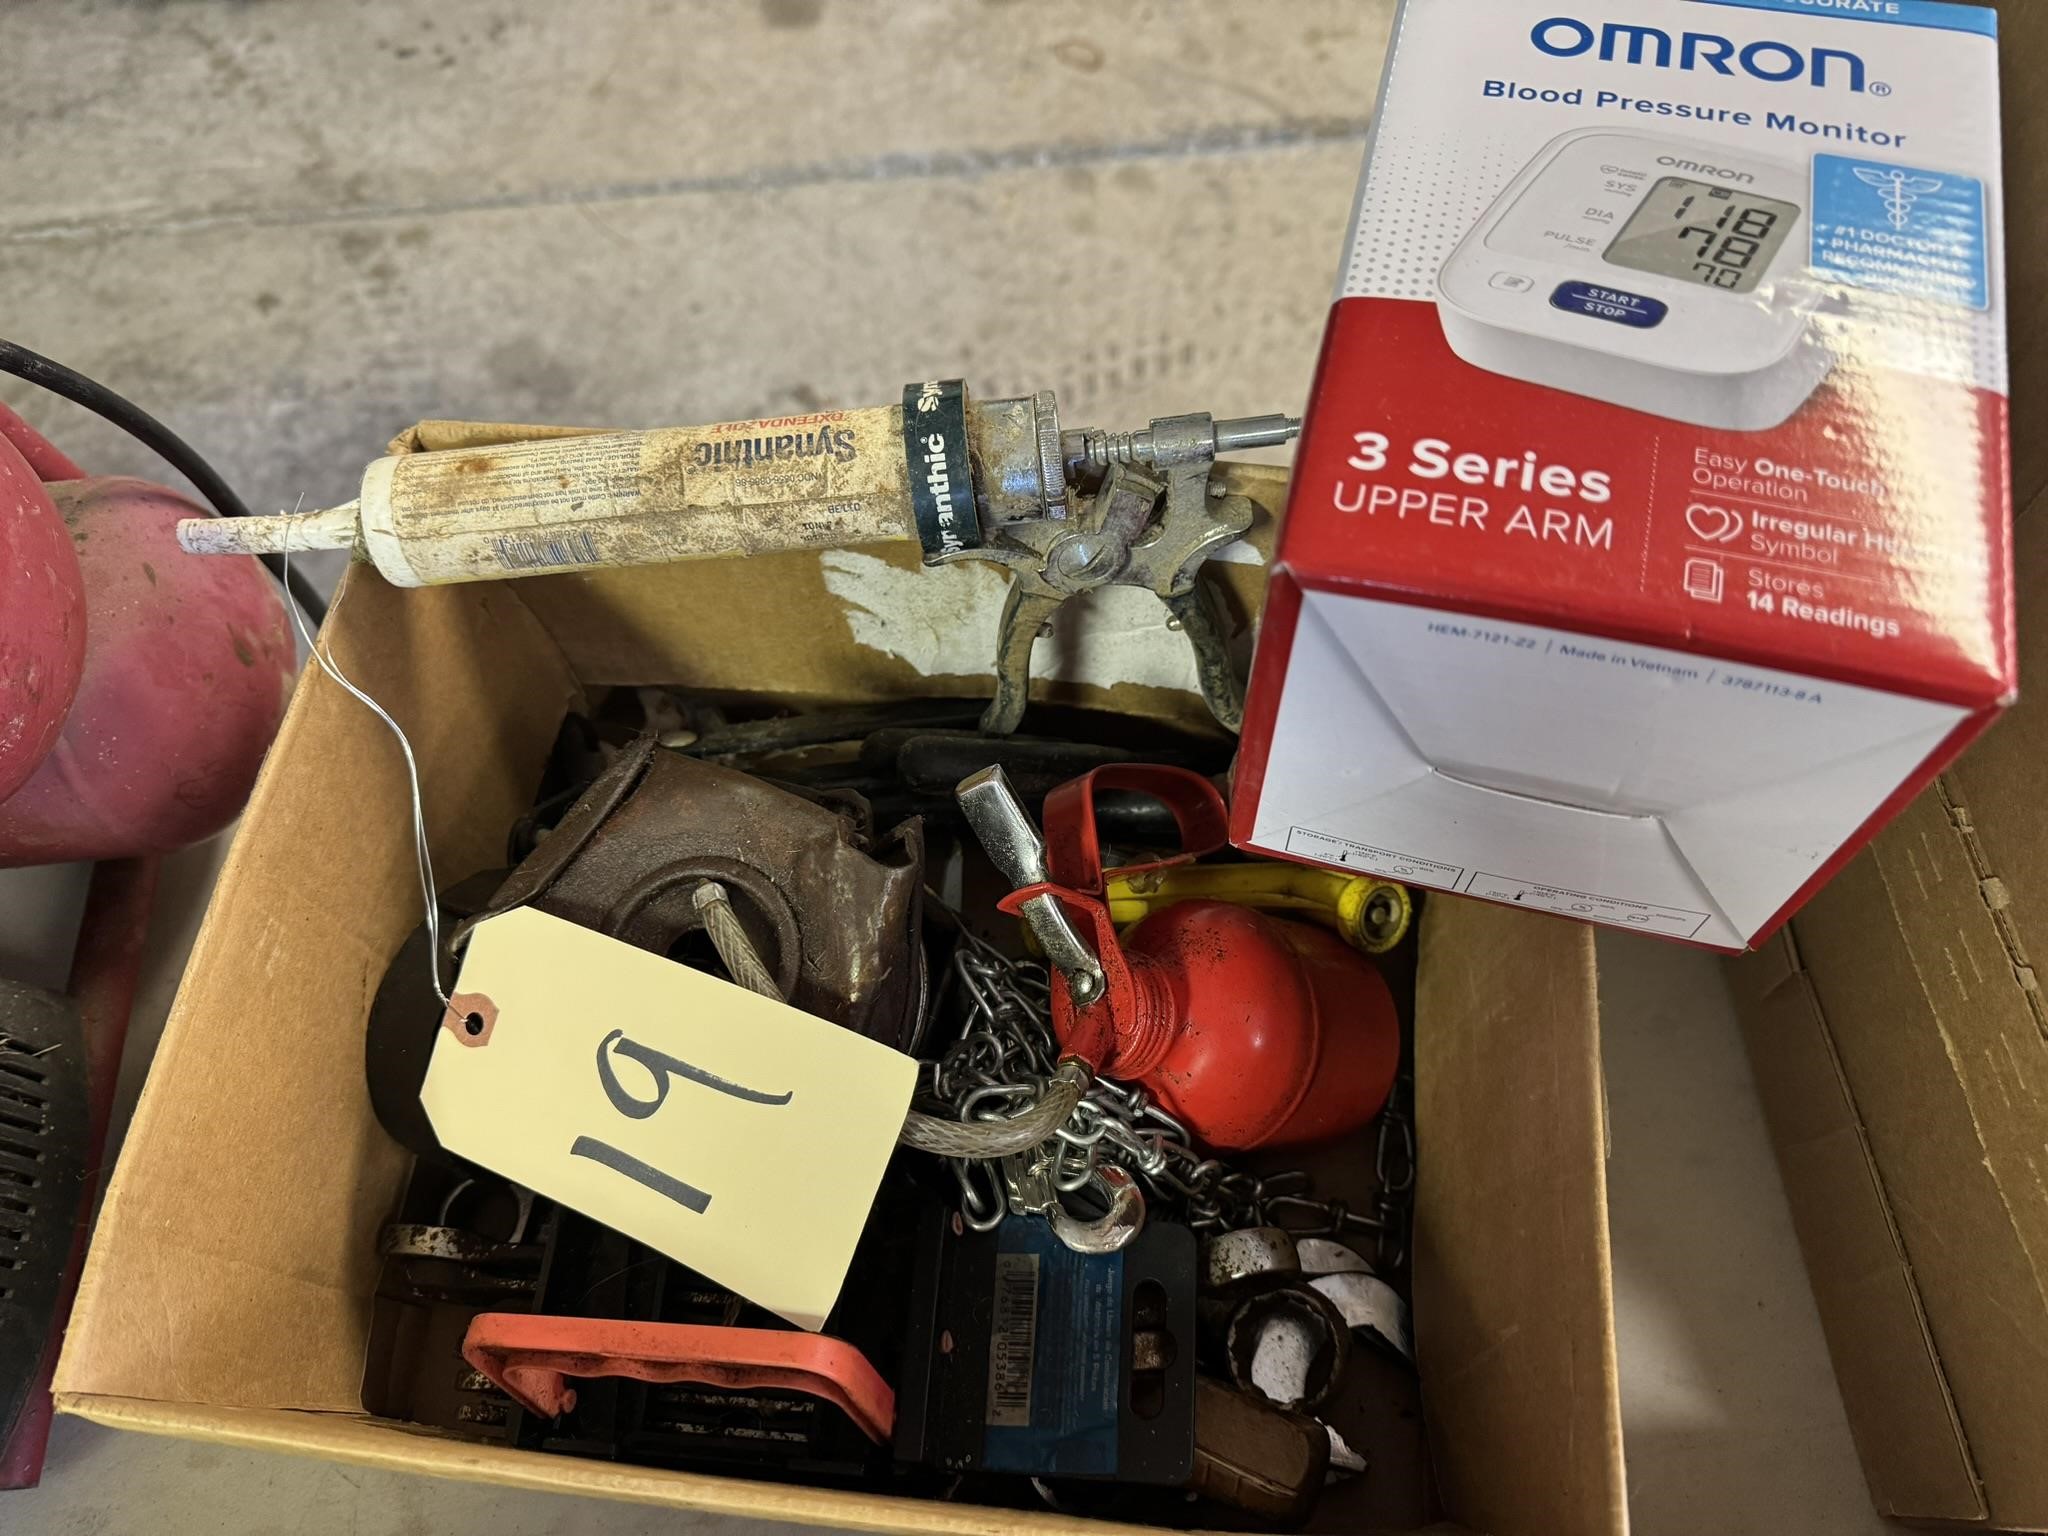 Box of Misc. Tools, Wrenches, Oilers